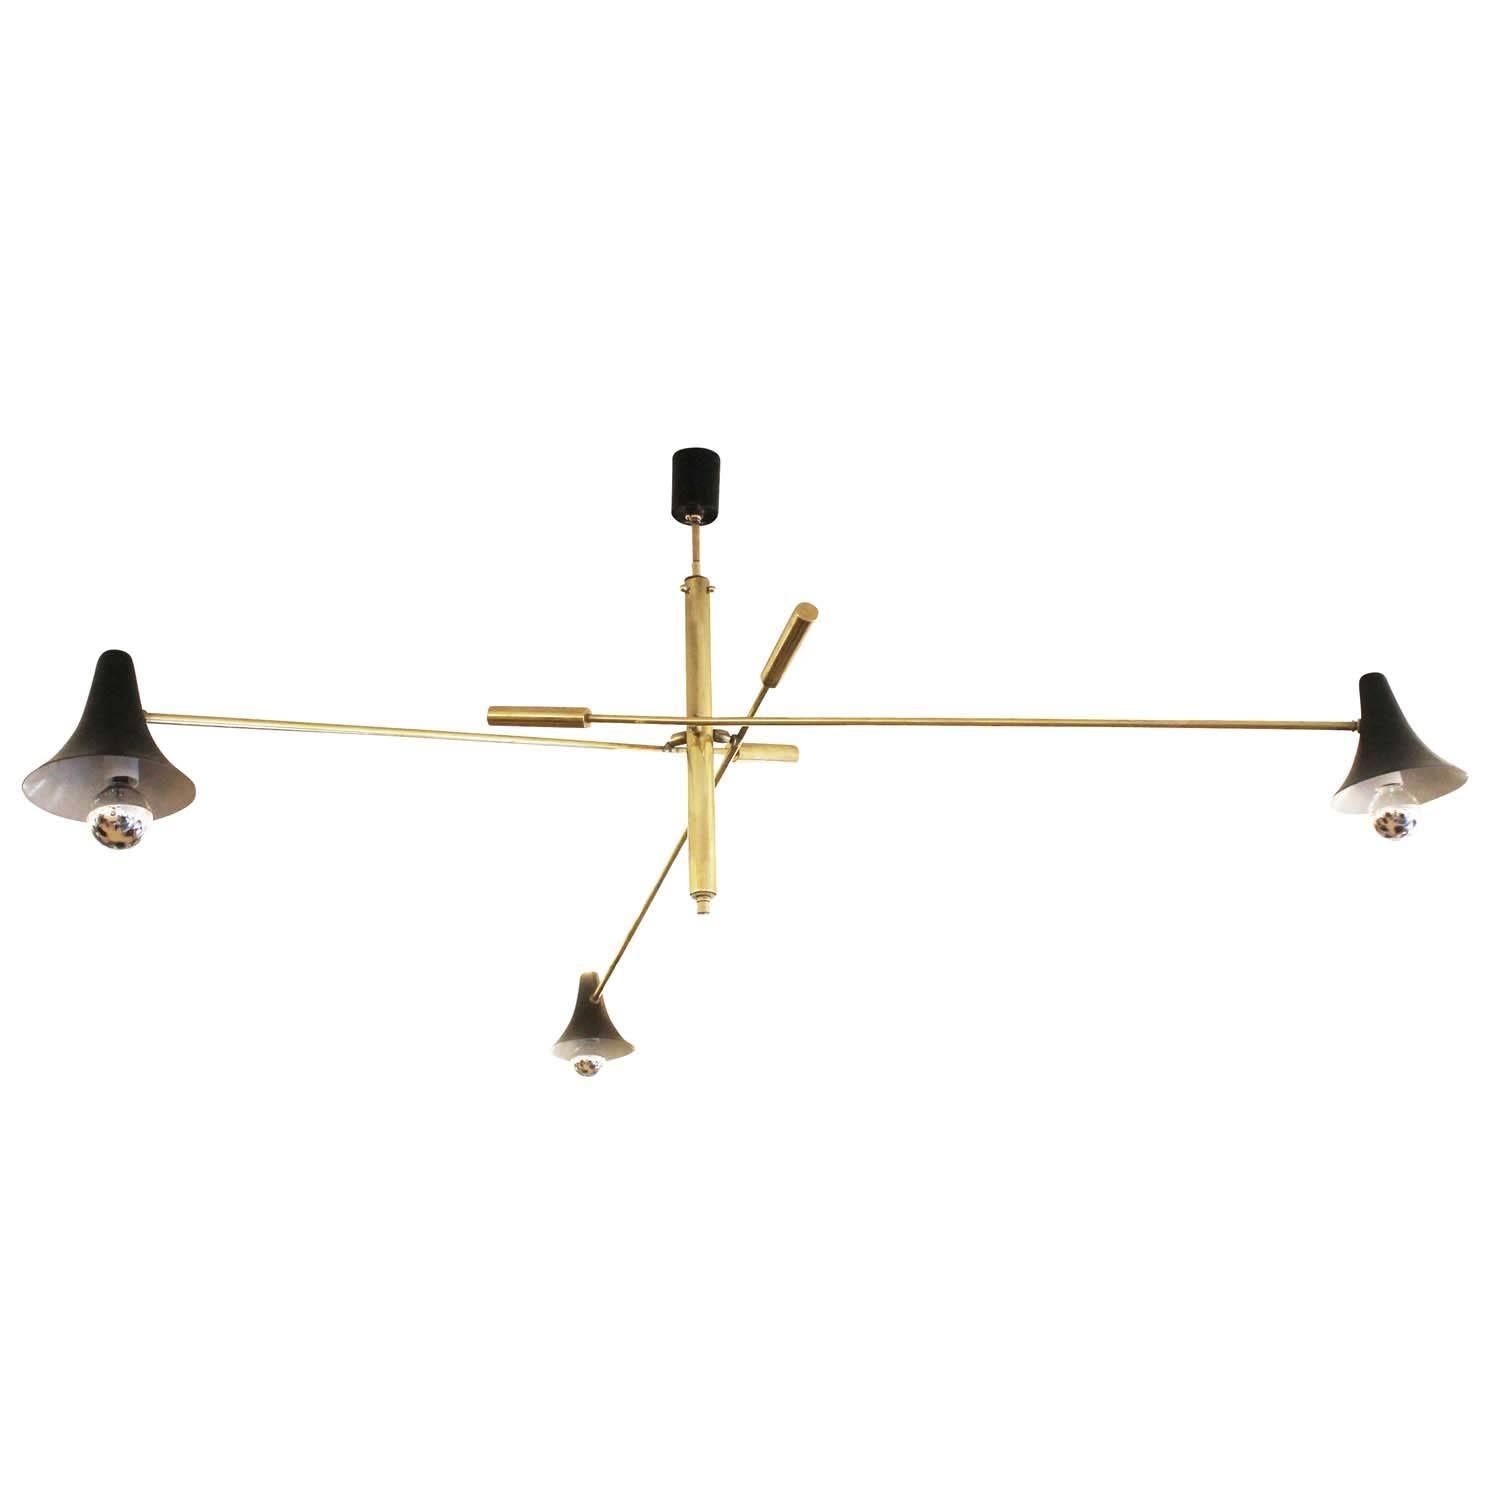 Adjustable arm chandelier featuring brass hardware and black shades and canopy. The slim stems give a light feeling to the fixture. Holds three candelabra sockets. Height of stem can be adjusted upon request.

Condition: Excellent vintage